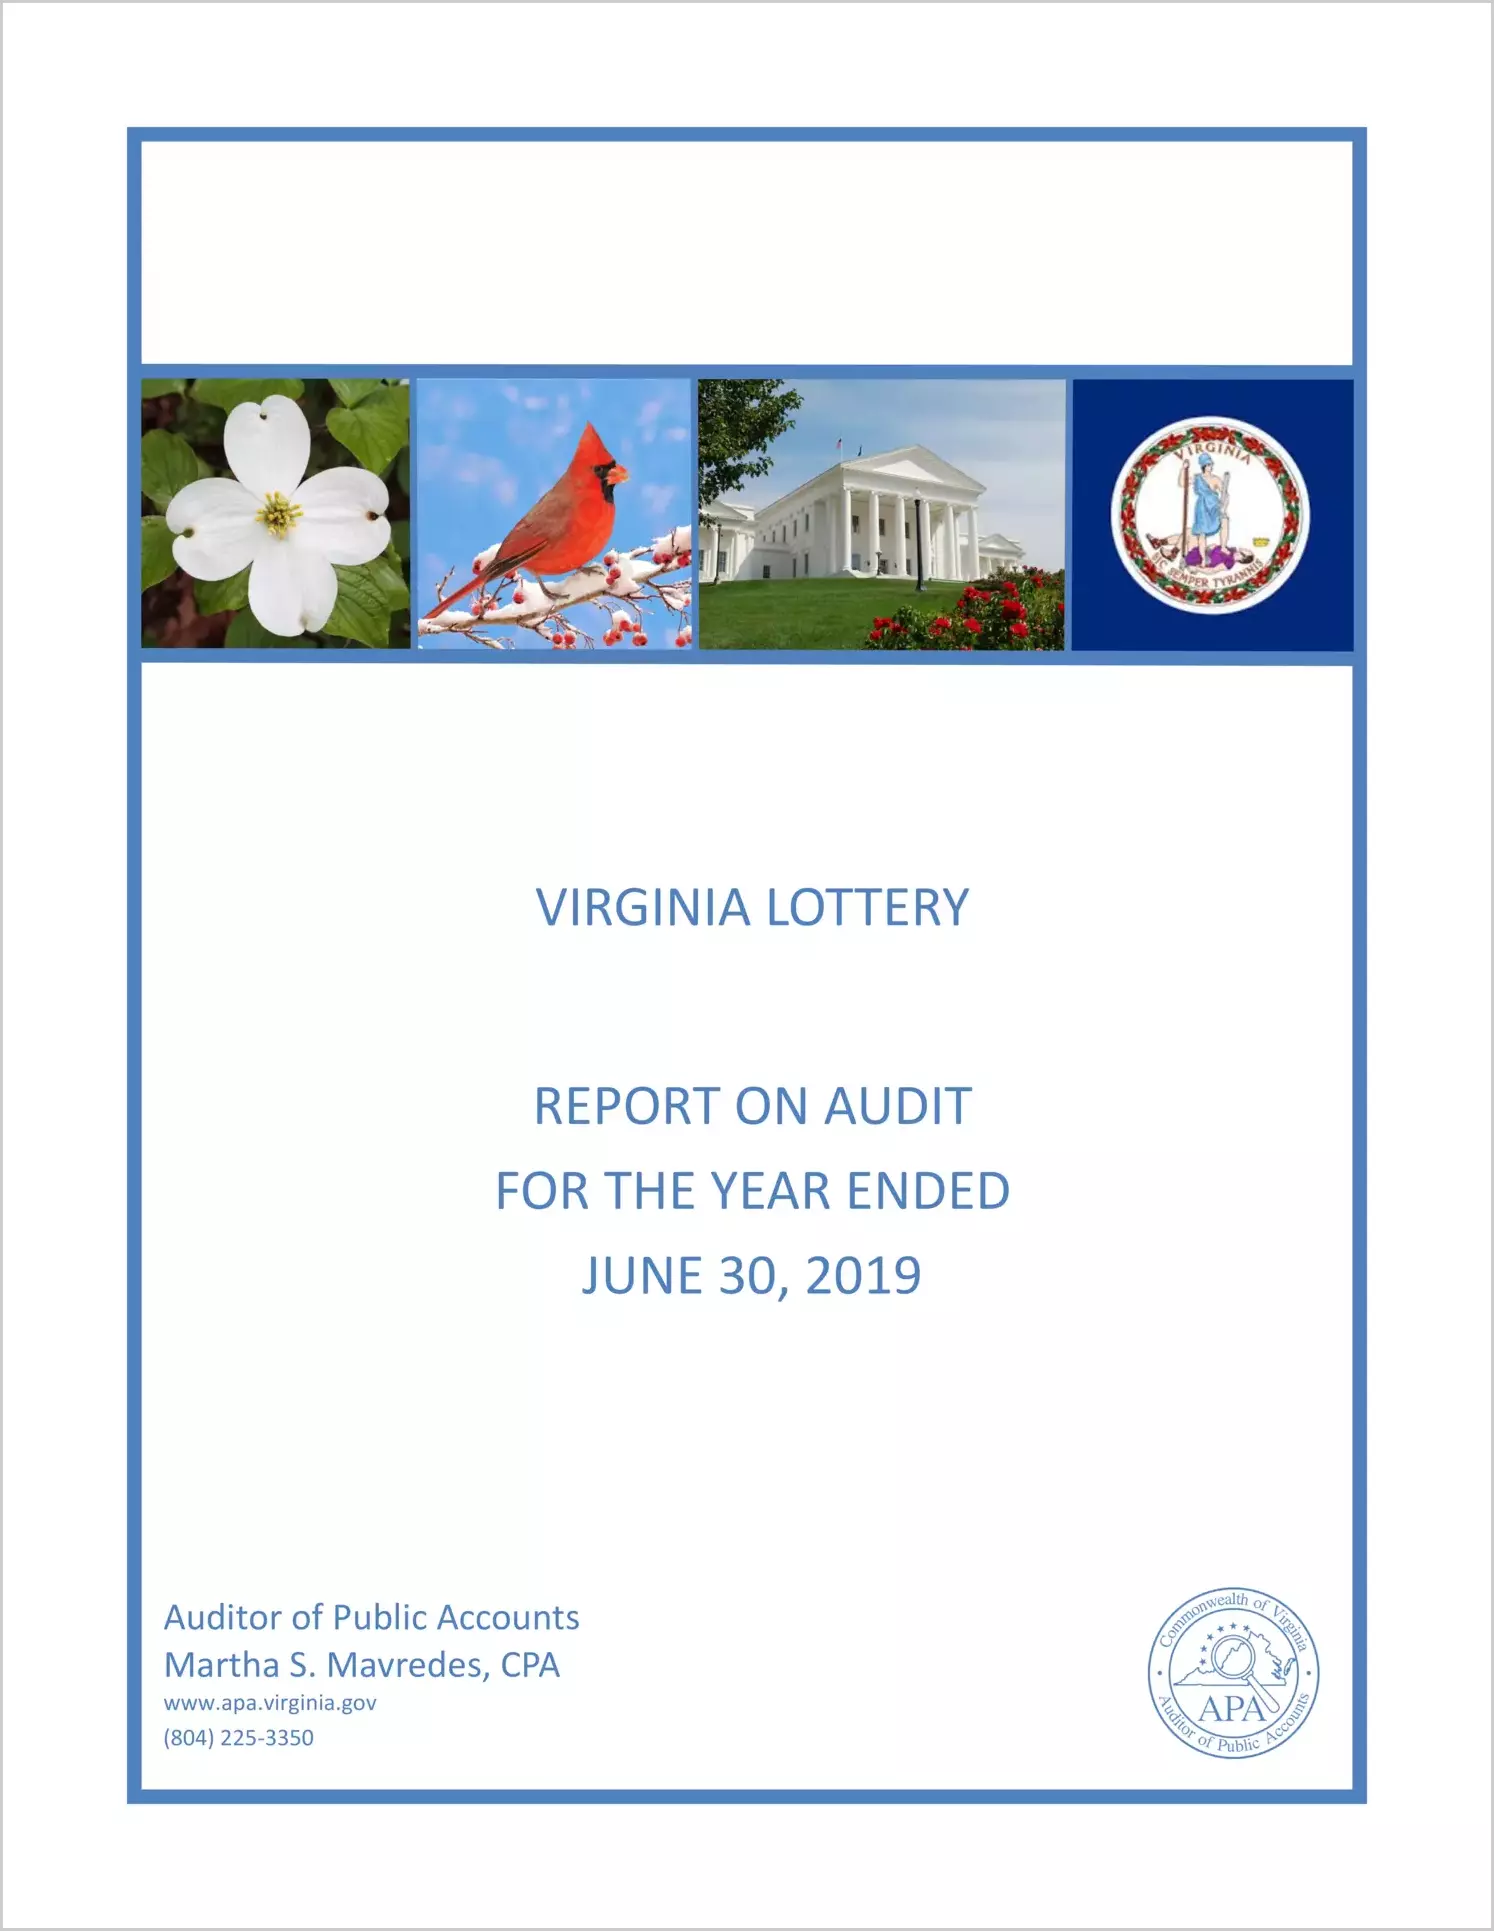 Virginia Lottery for the year ended June 30, 2019